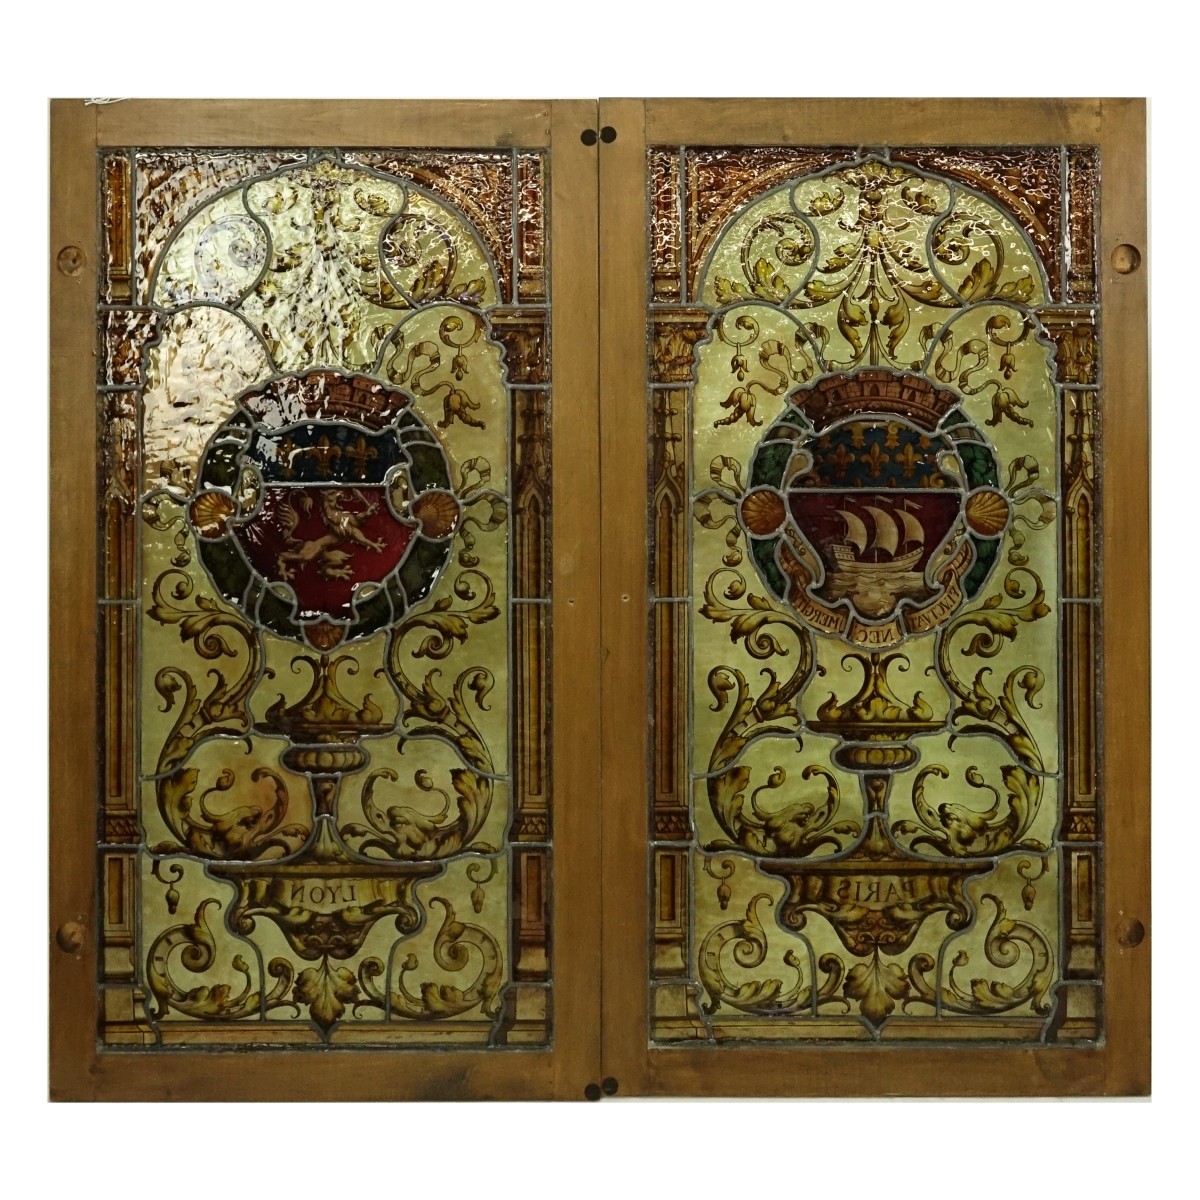 Pair of Vintage Stained Glass Window Panels